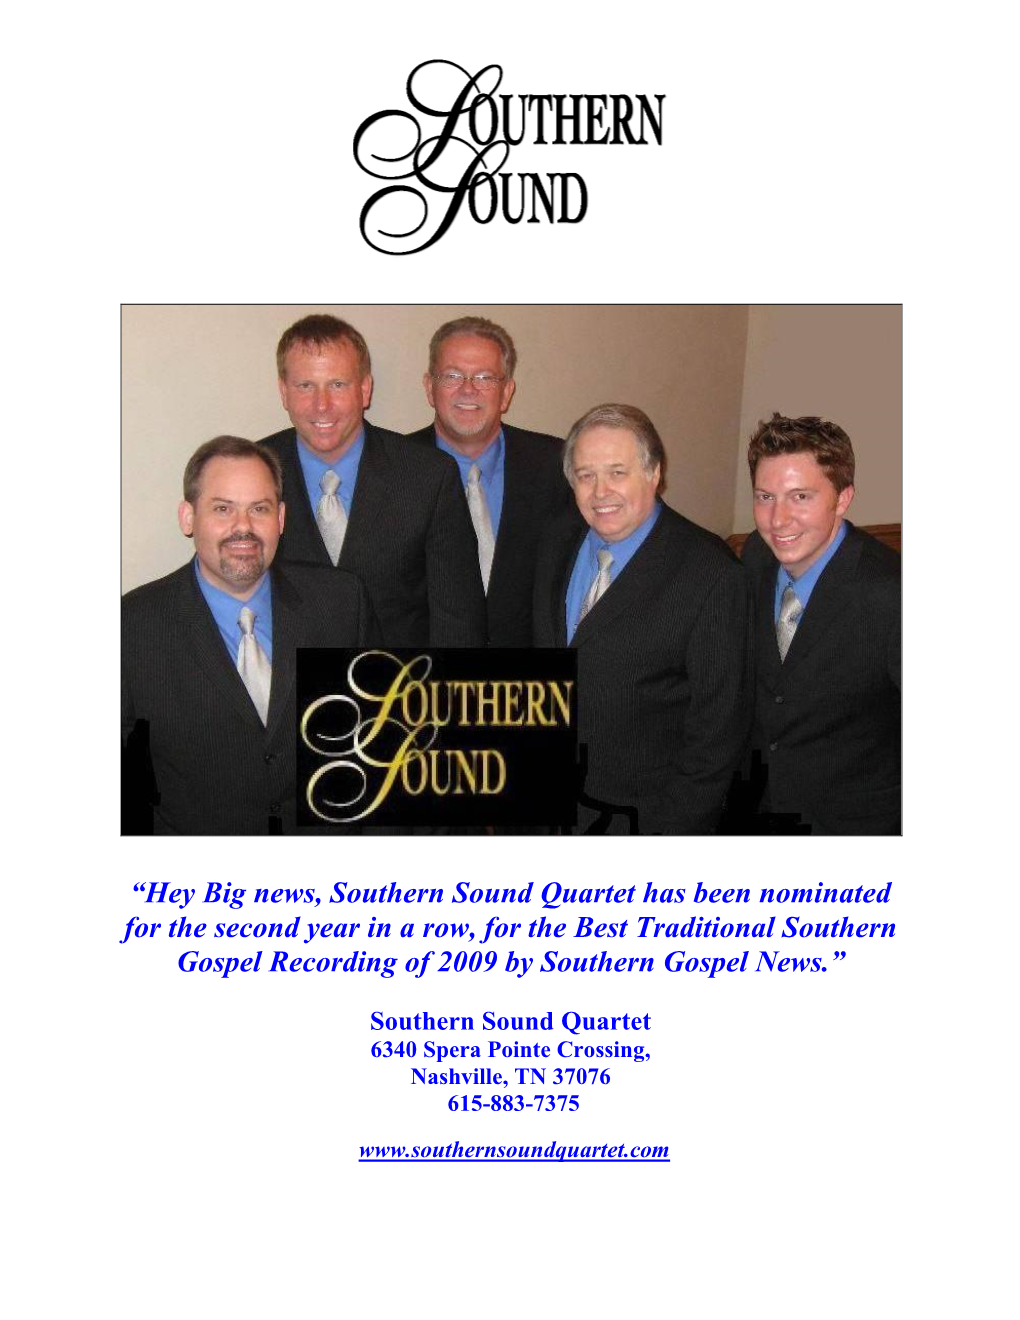 Southern Sound Quartet Has Been Nominated for the Second Year in a Row, for the Best Traditional Southern Gospel Recording of 2009 by Southern Gospel News.”